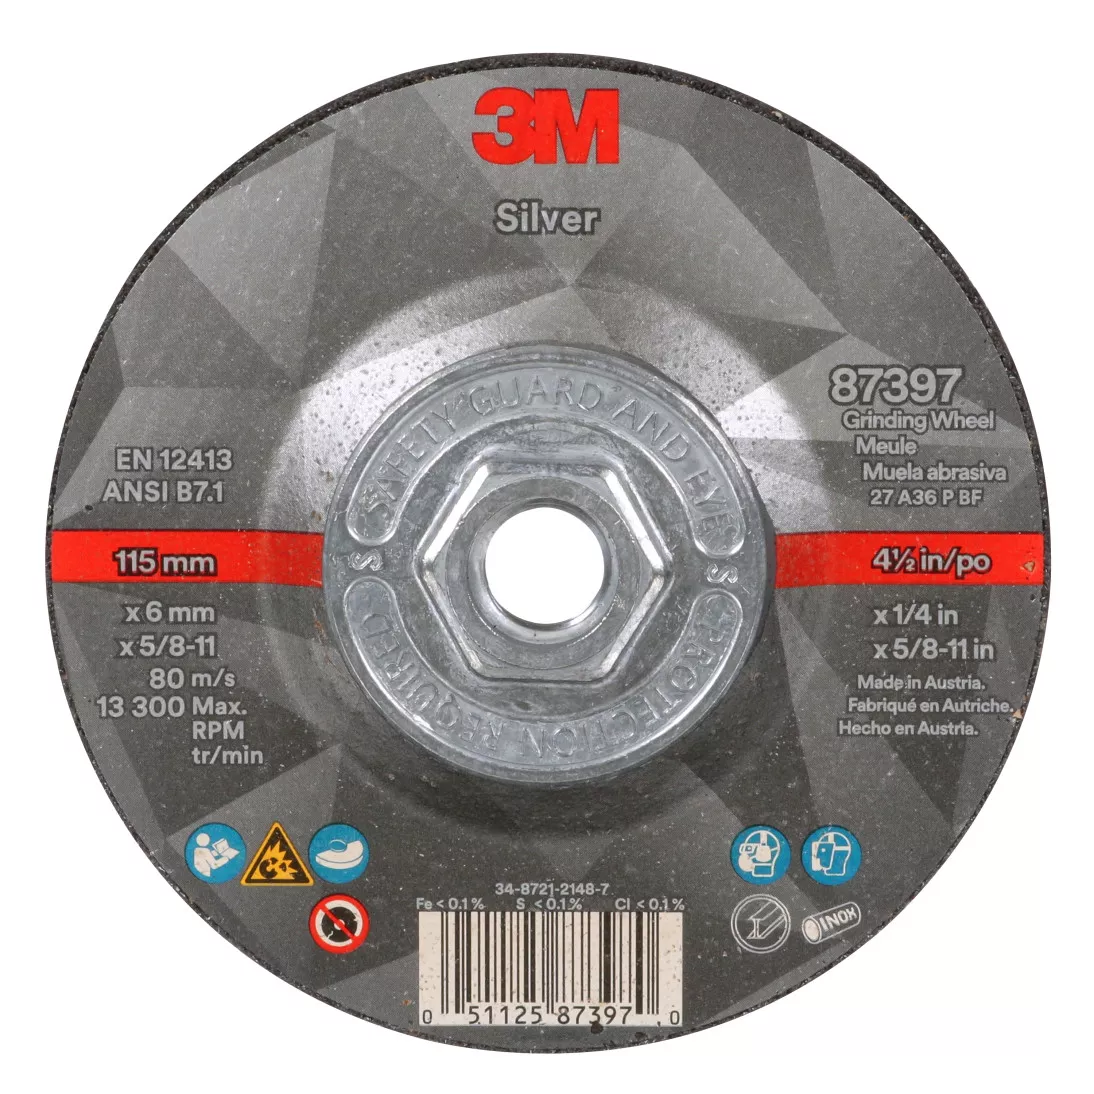 3M™ Silver Depressed Center Grinding Wheel, 87397, T27 Quick Change, 4.5
in x 1/4 in x 5/8 in-11 in, 10/Inner, 20 ea/Case